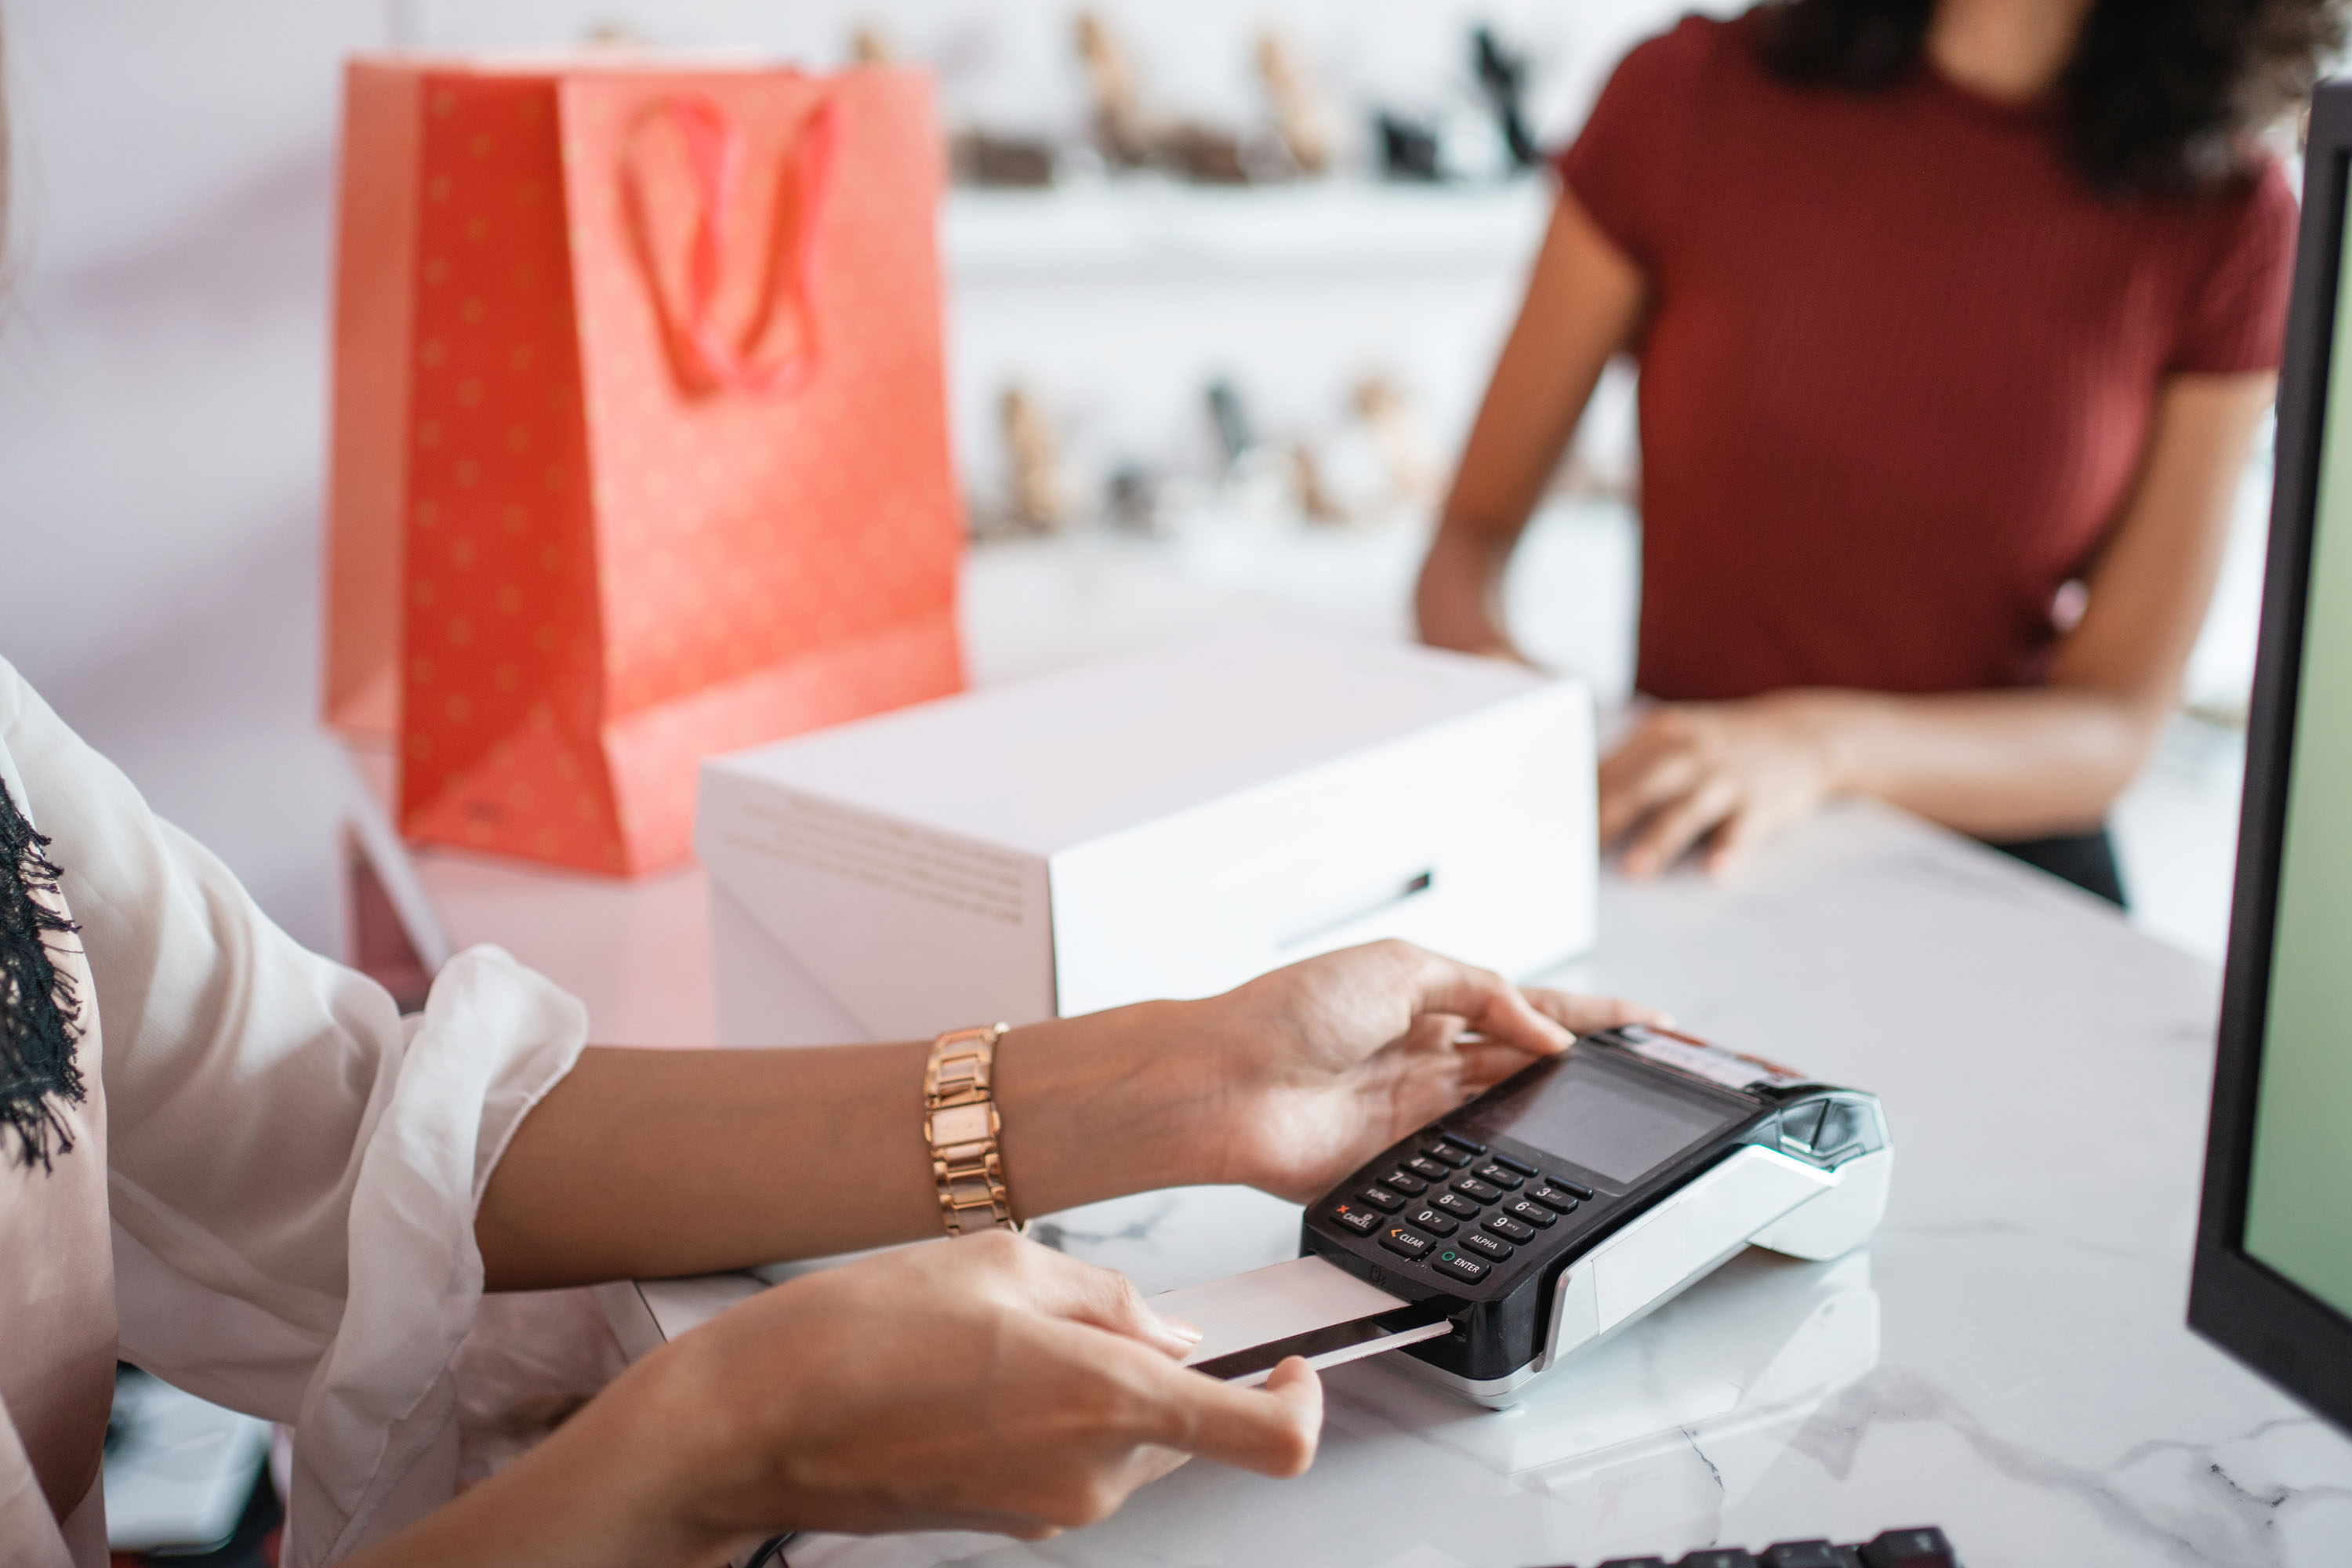 Prevent retail return fraud from damaging holiday profits